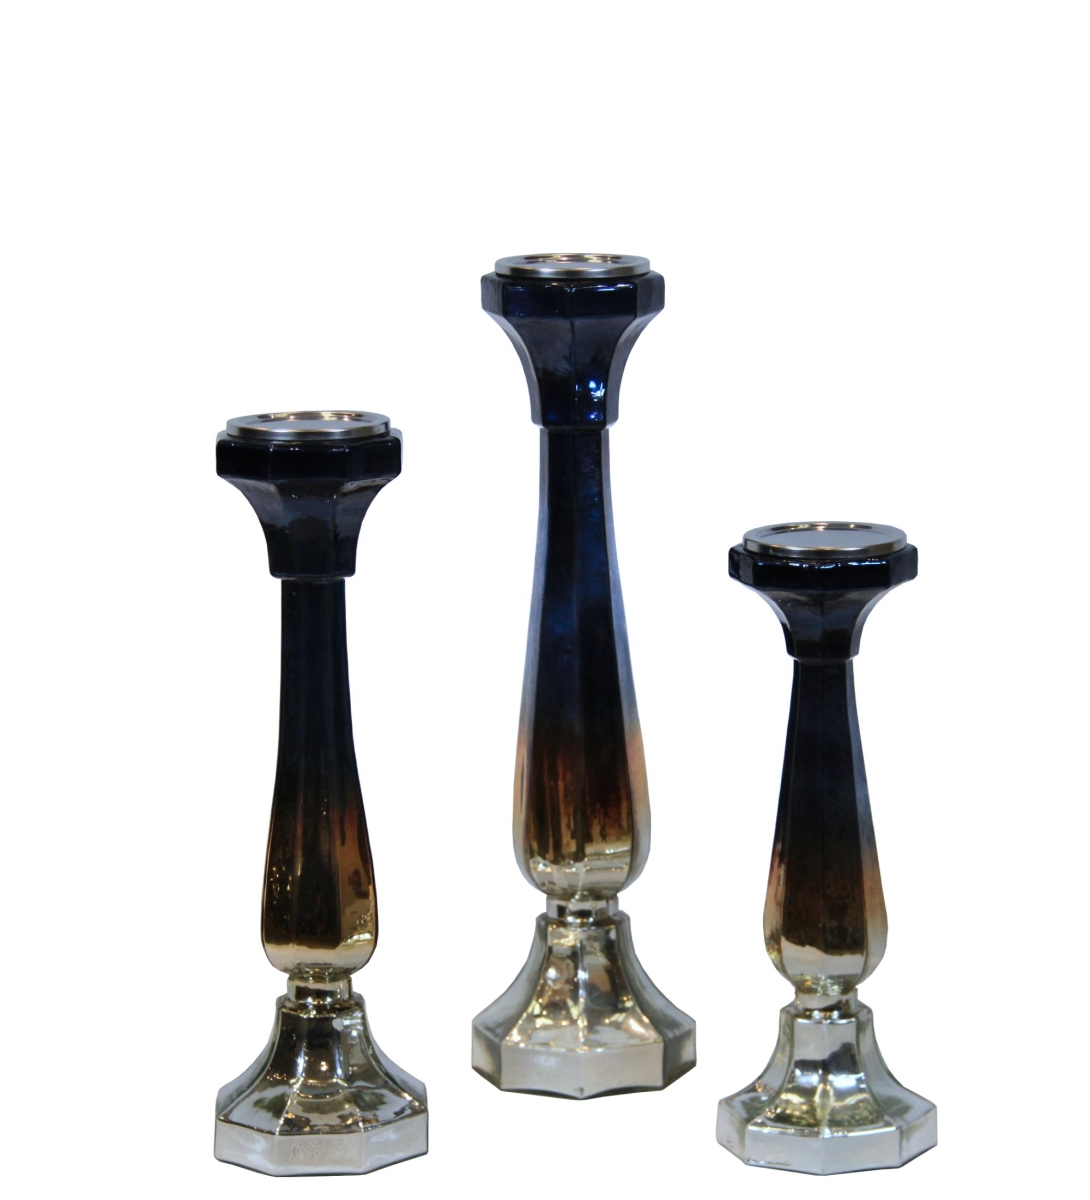 55045 Candle Holders, Blue Ombre - 3 Piece